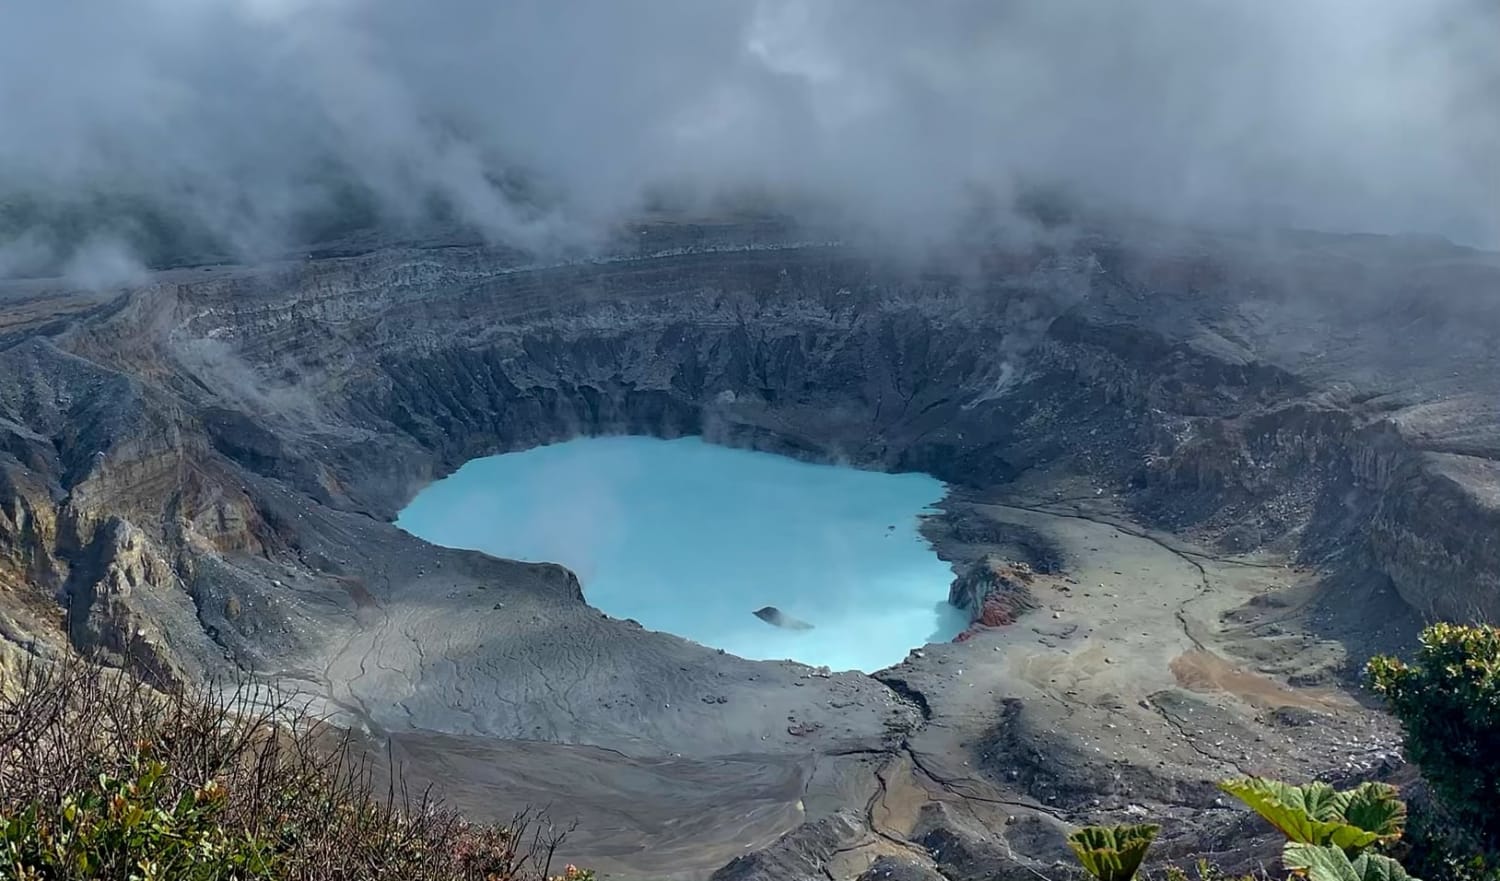 Poas Volcano, Costa Rica (8,848 ft). Sulfuric, bubbling, green rain fed lake at the bottom, surrounded by smoke and steam rising from fumaroles